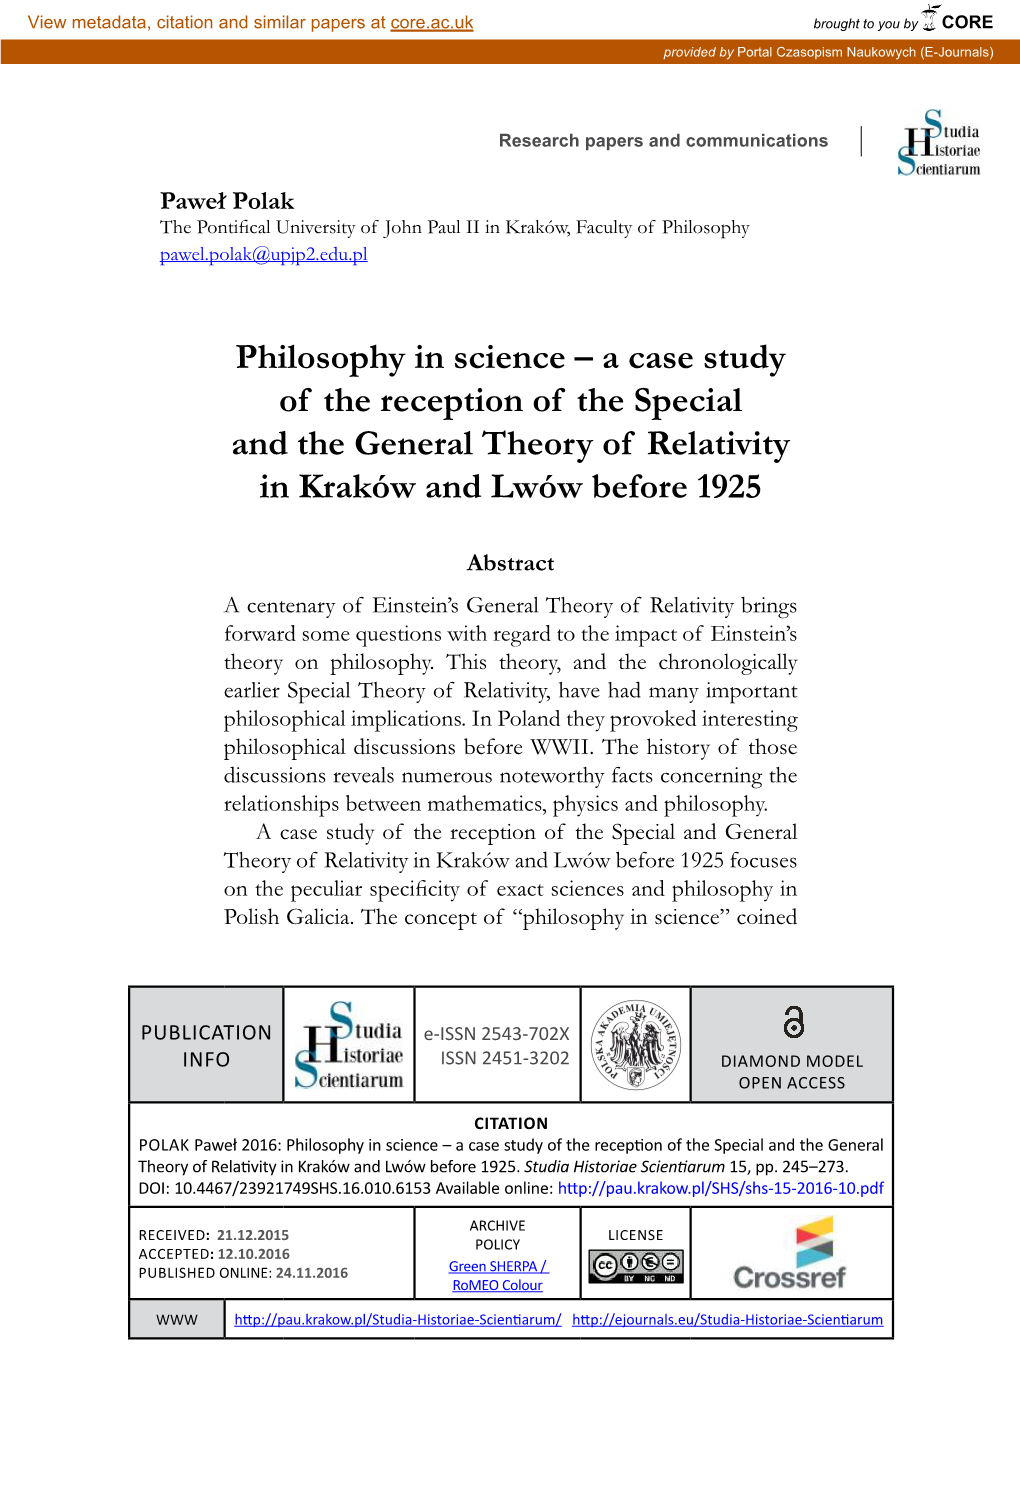 Philosophy in Science – a Case Study of the Reception of the Special and the General Theory of Relativity in Kraków and Lwów Before 1925